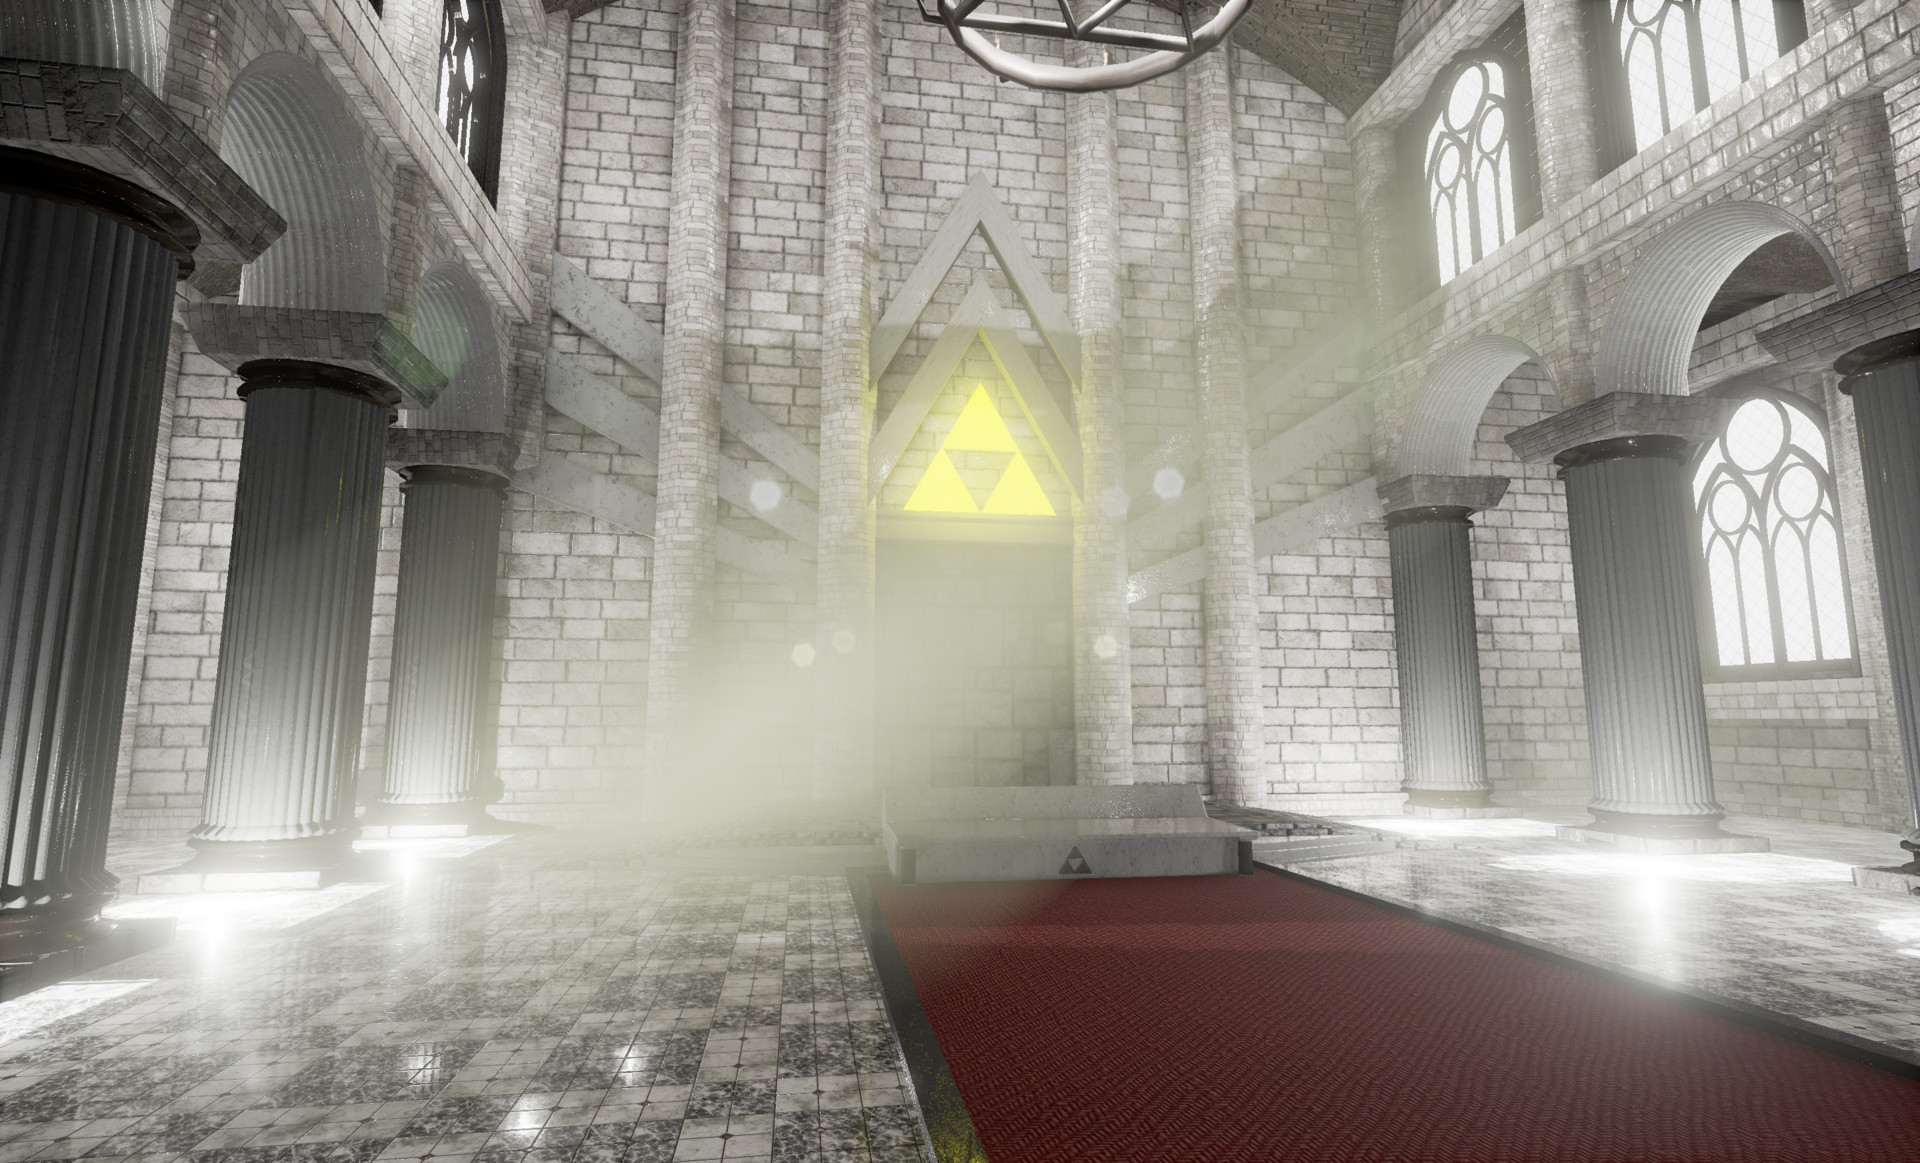 Take a look at Zelda Ocarina of Time's Temple Of Time in Unreal